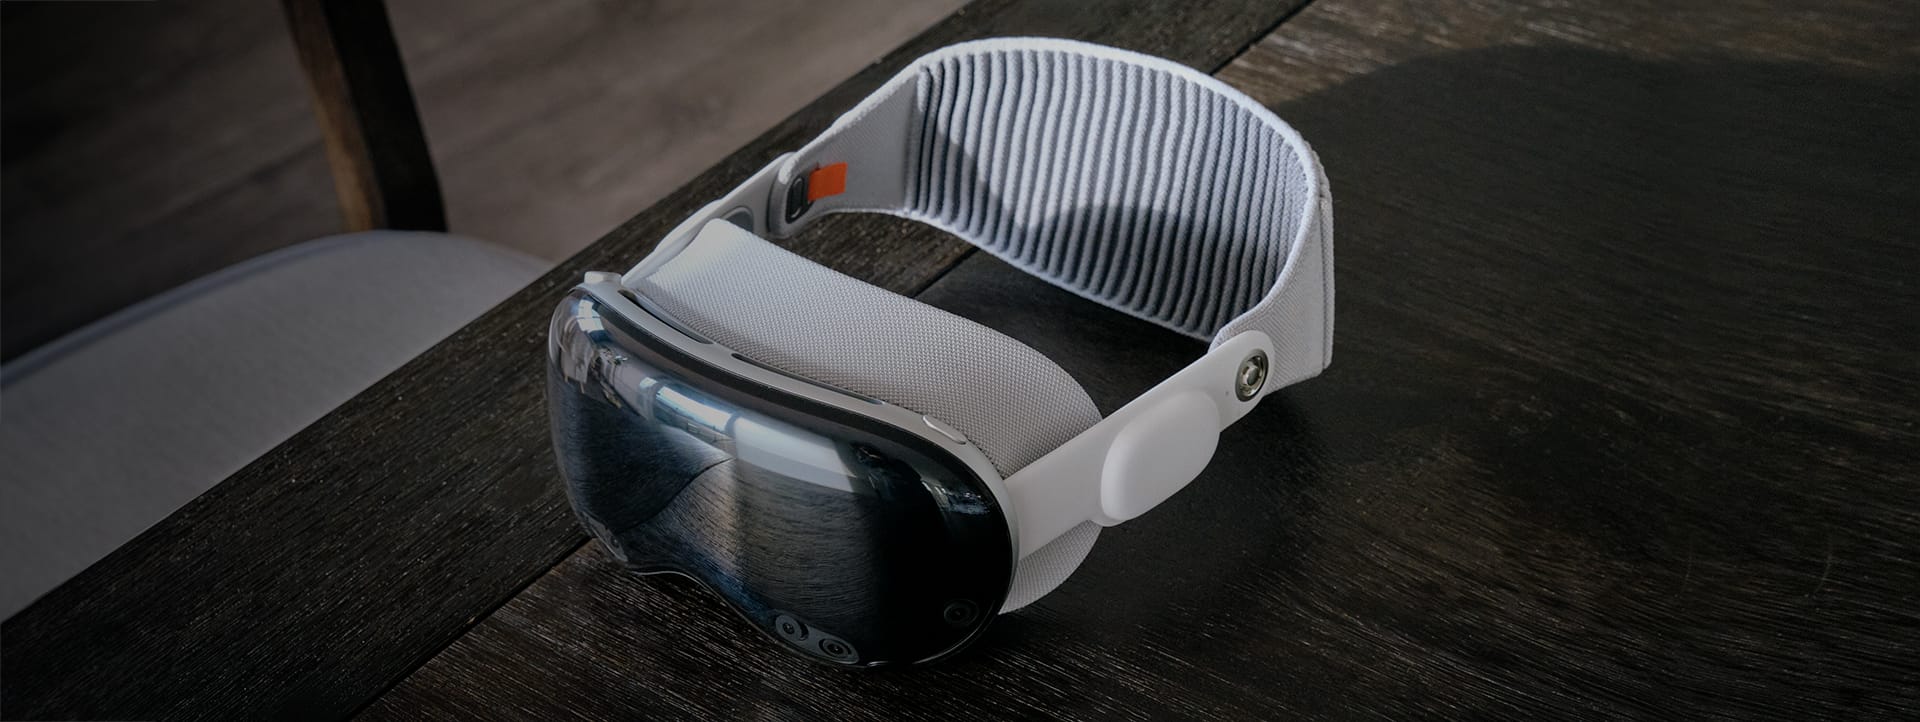 Apple Vision Pro virtual reality headset sitting on a table